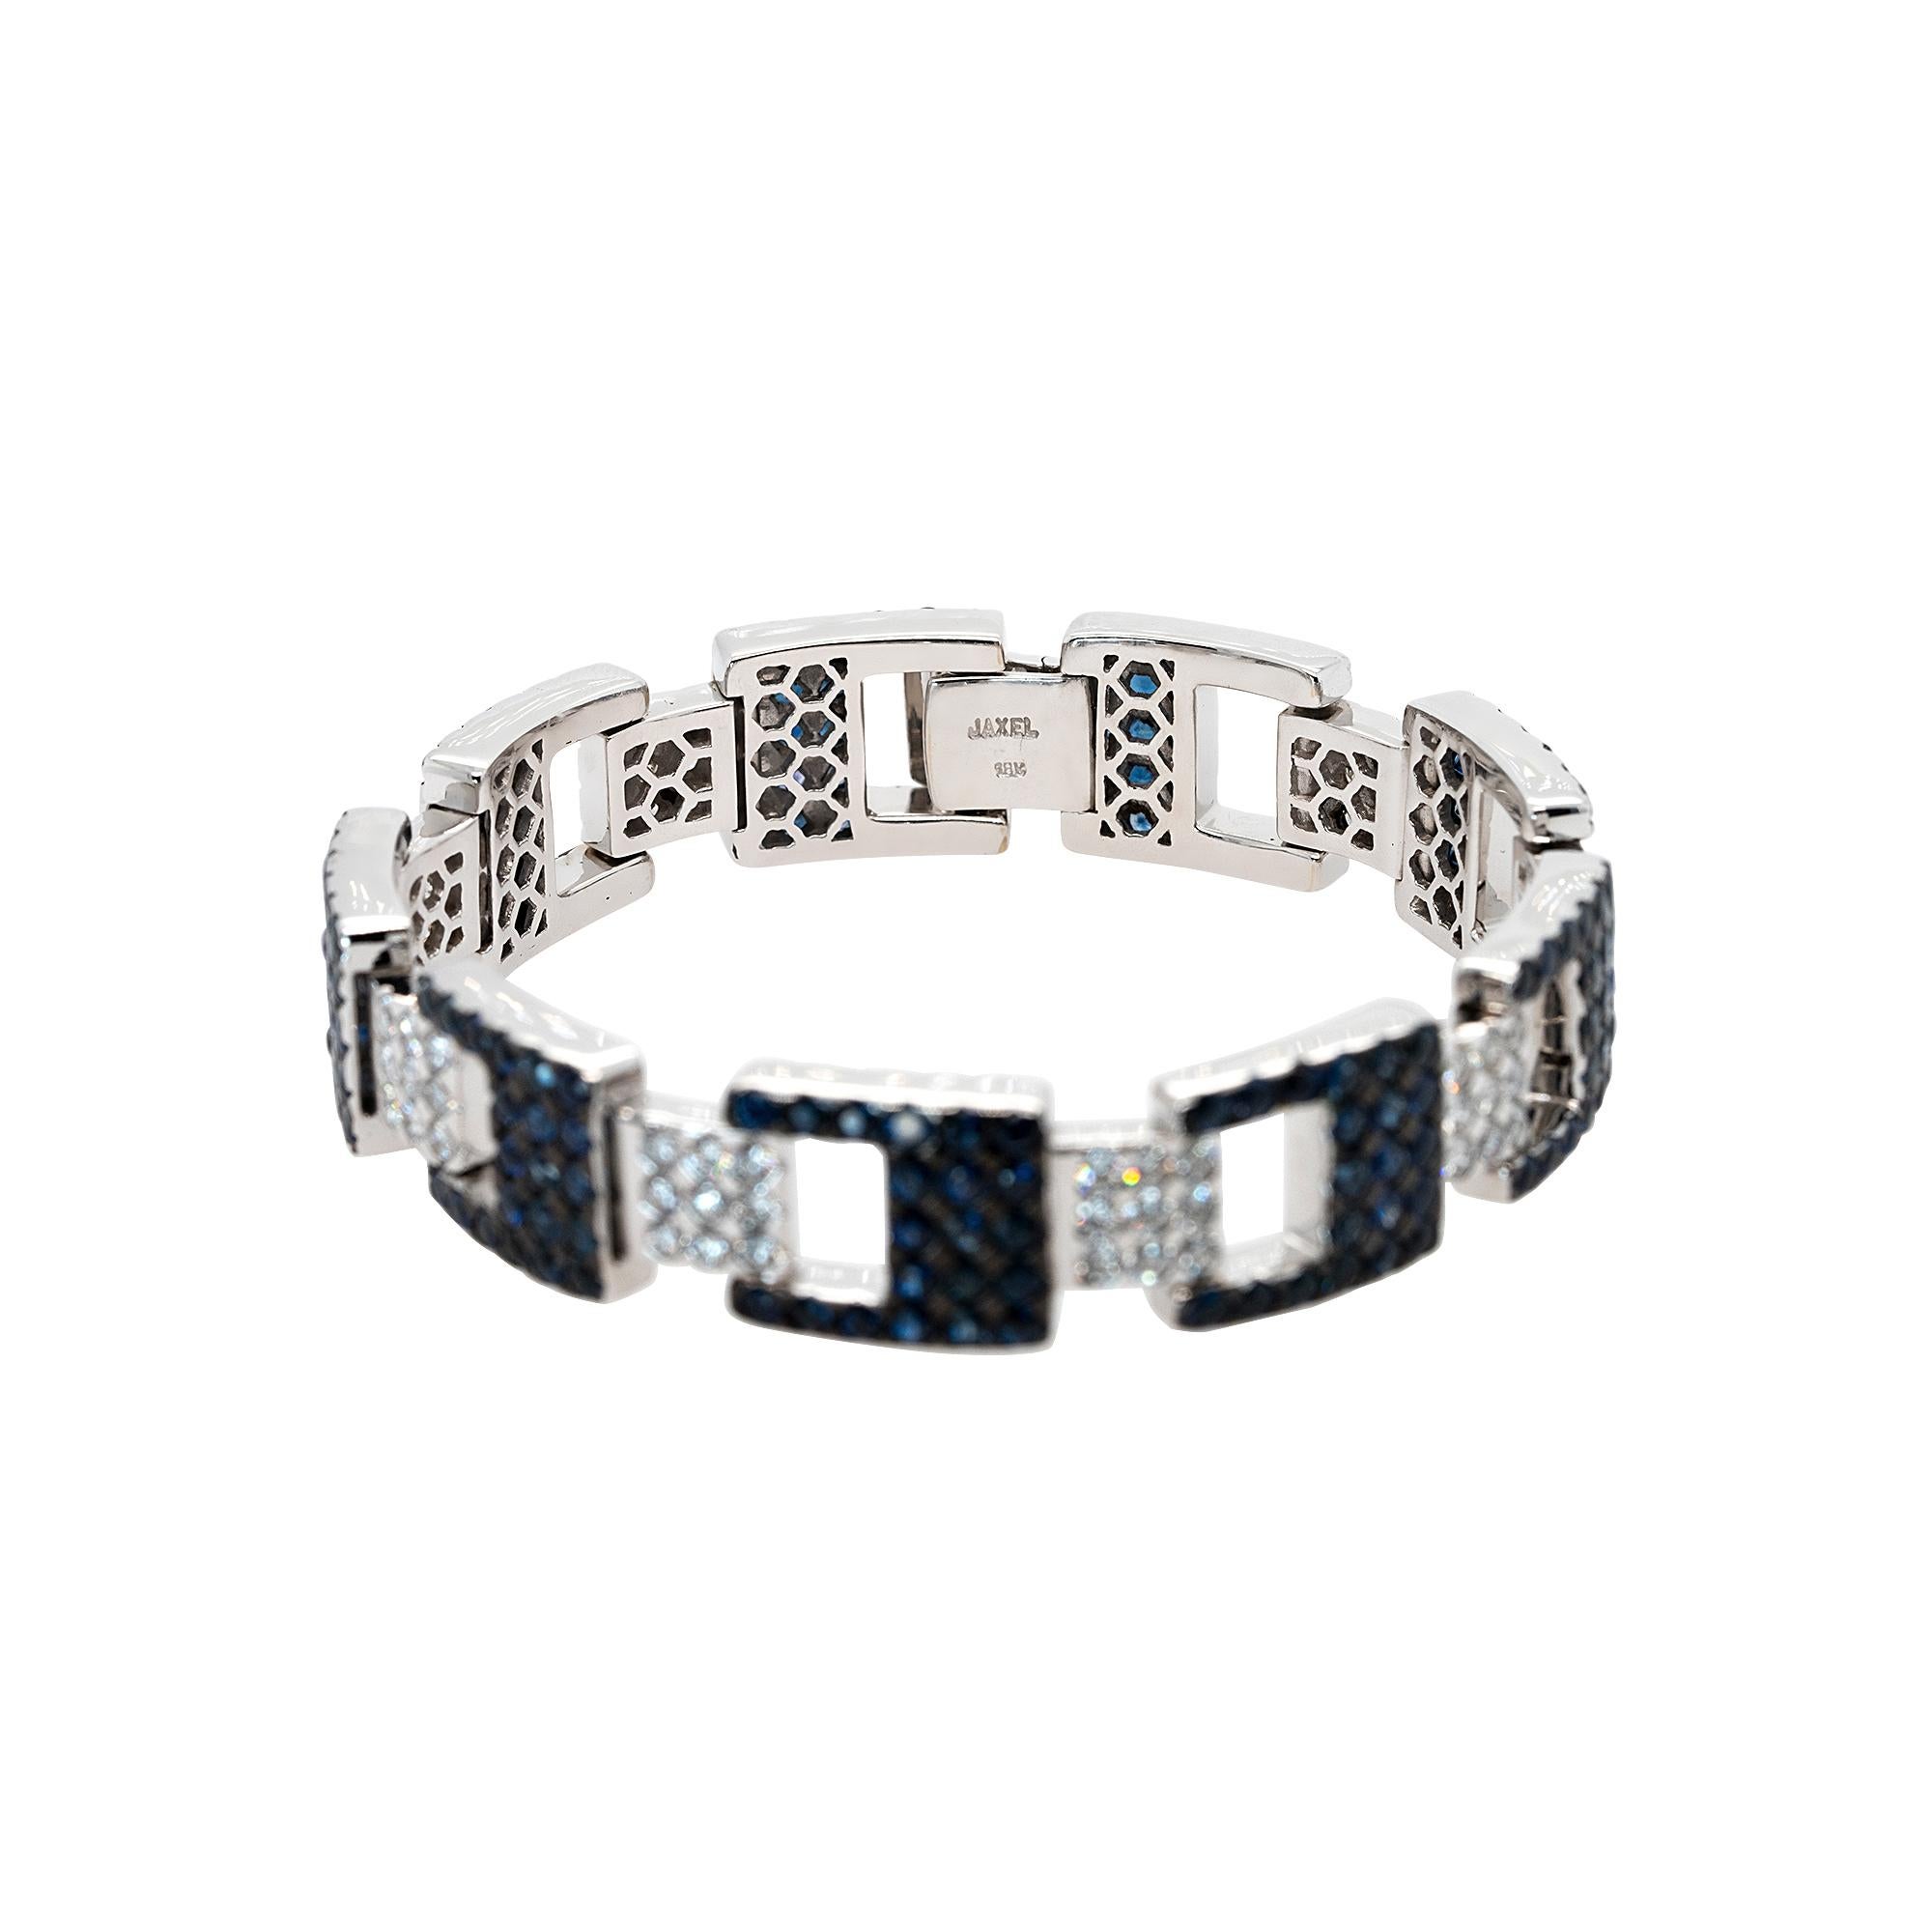 Material: 18k White Gold
Diamond Details: 2.43ctw of Round Brilliant Diamonds G color and VS clarity.
Gem Details: 8.10ctw of Round Blue Sapphires Measurements: 7'' 12.6mm x 3.7mmTotal Weight: 48.9G (31.3 dwt)
This item comes with a presentation